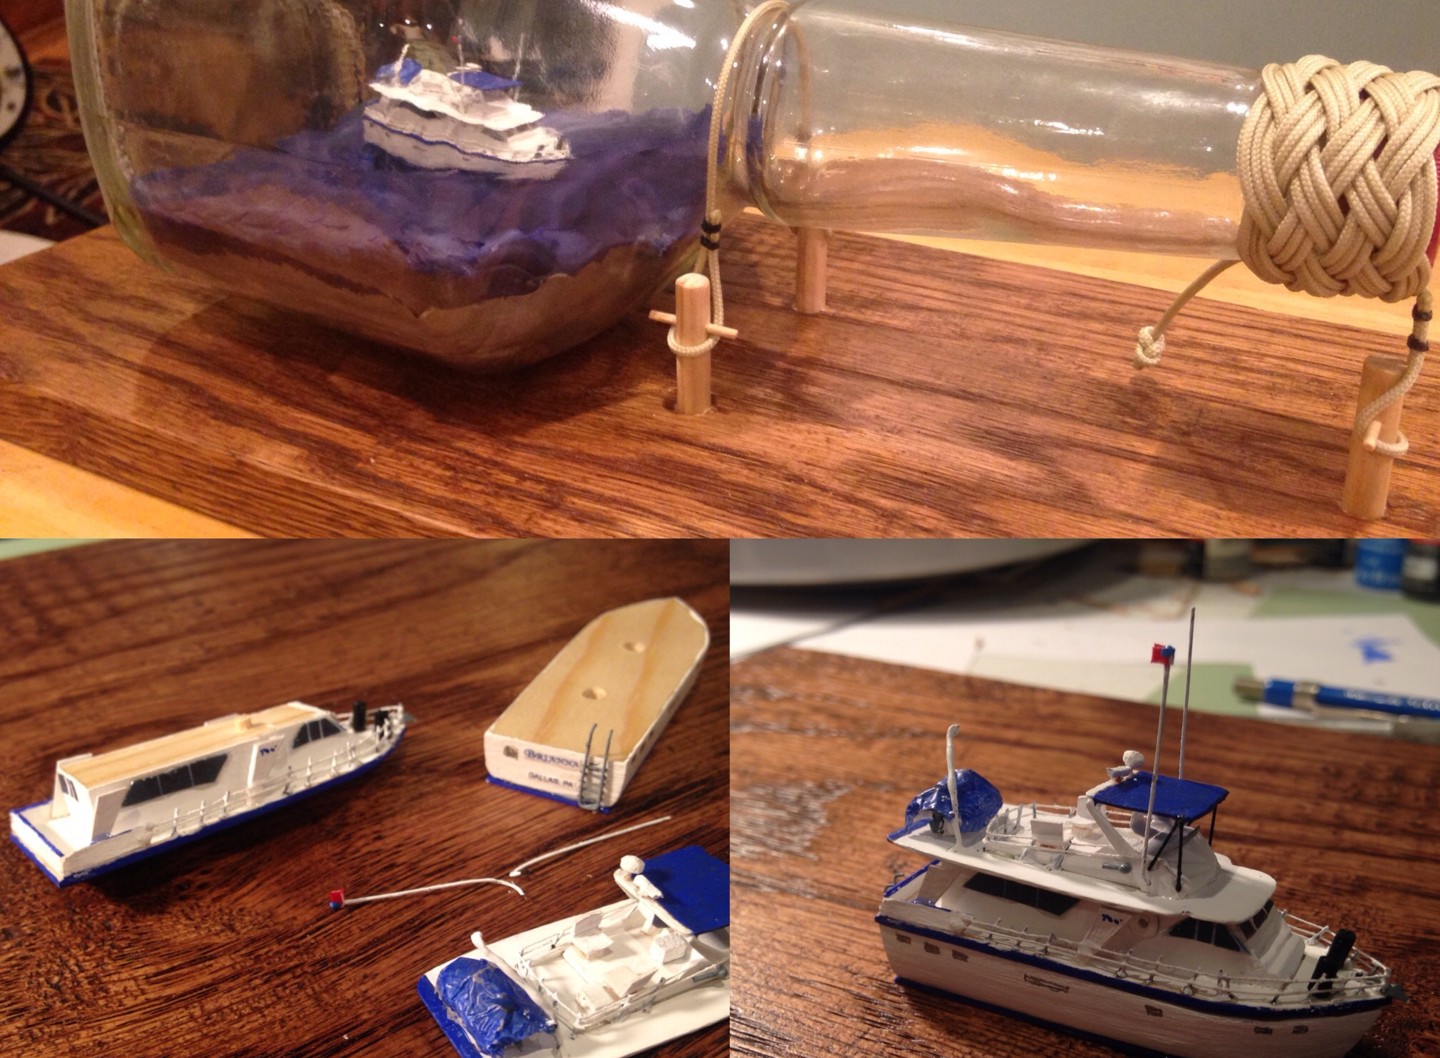 ORDER YOUR CUSTOM SHIP IN A BOTTLE TODAY